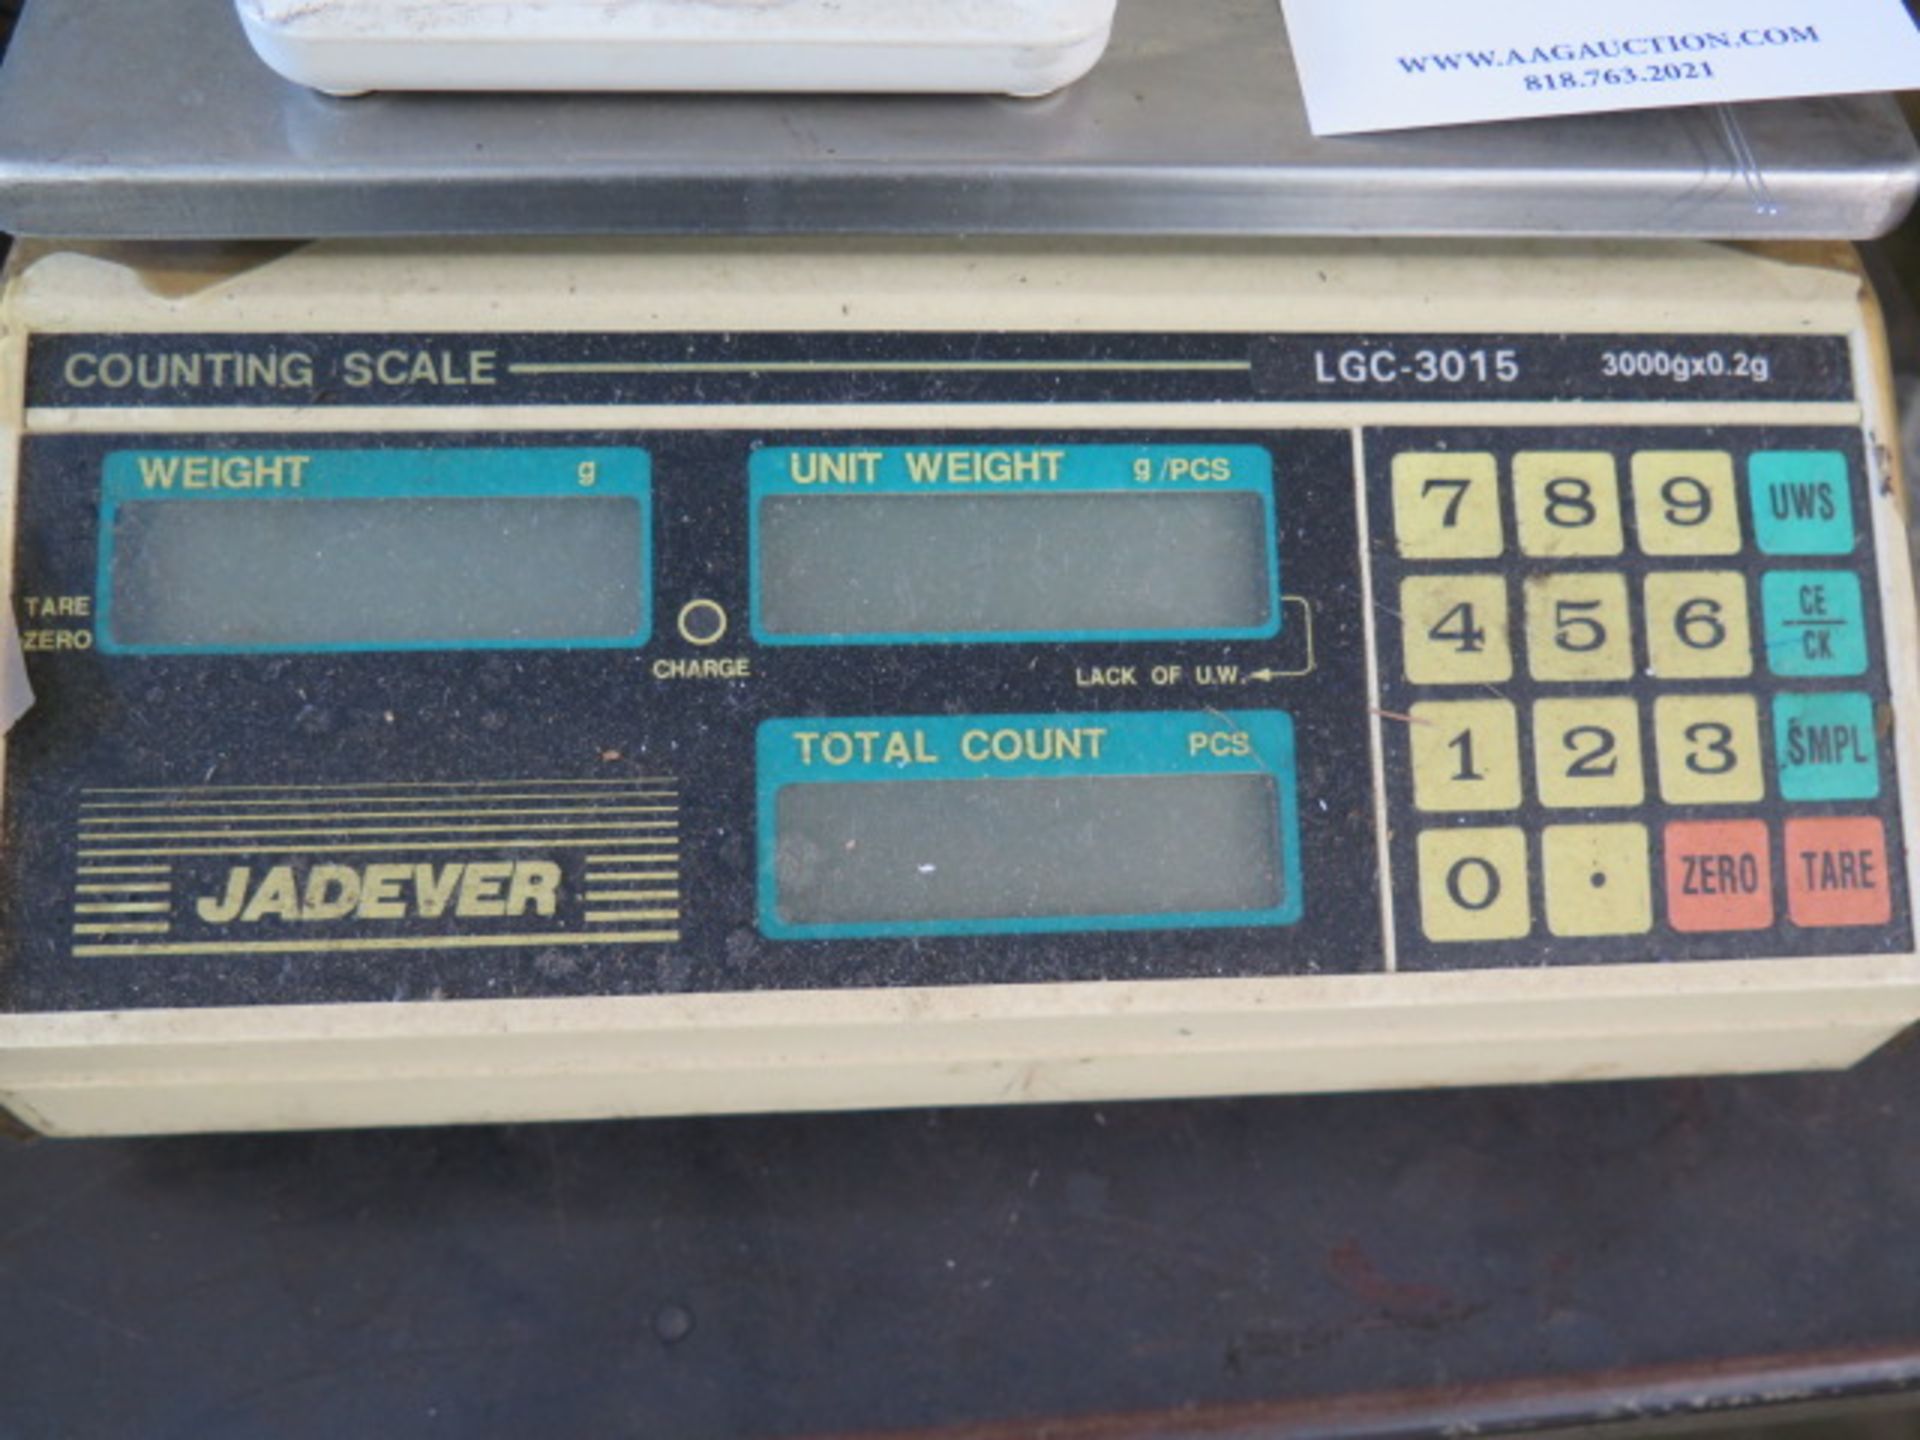 Jadever LGC-3015 3000g Digital Counting Scale and Taylor Digital Scale (SOLD AS-IS - NO WARRANTY) - Image 3 of 3